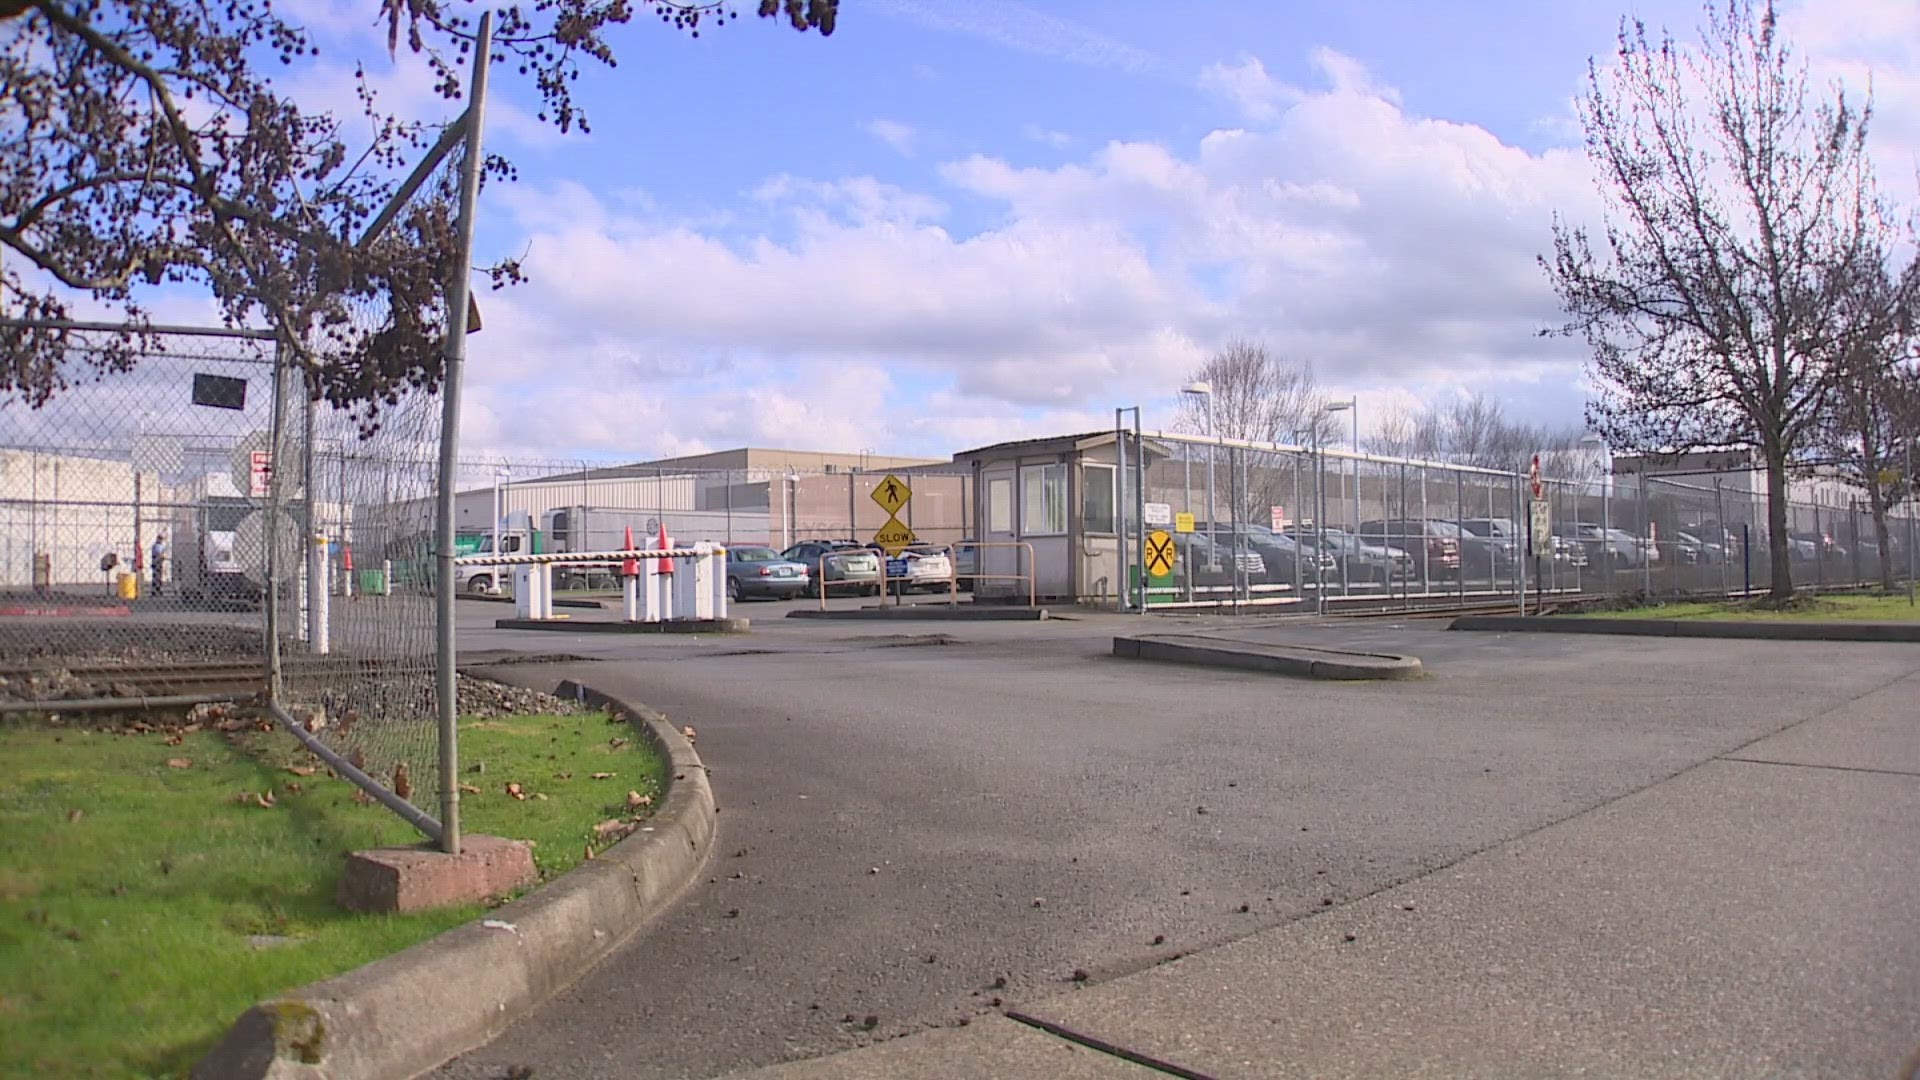 The state is investigating after allegations of workplace violations and abuse at the Northwest ICE Processing Center in Tacoma.